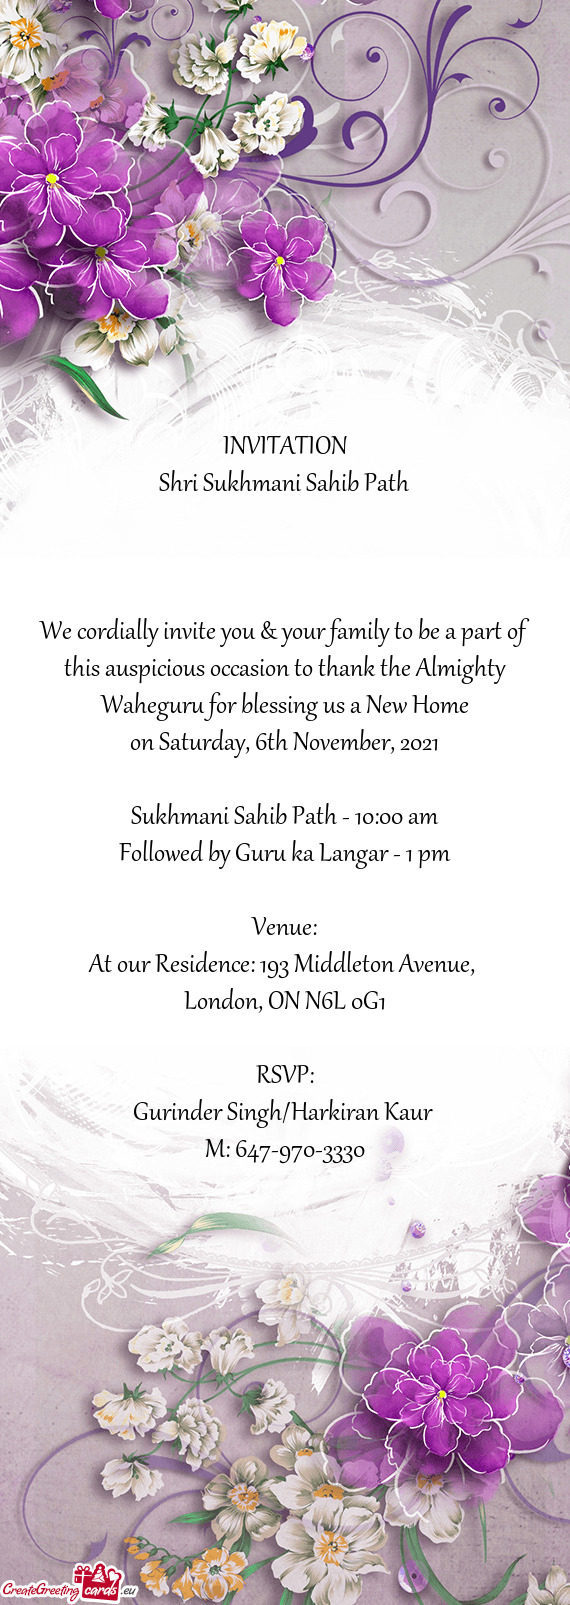 Waheguru for blessing us a New Home